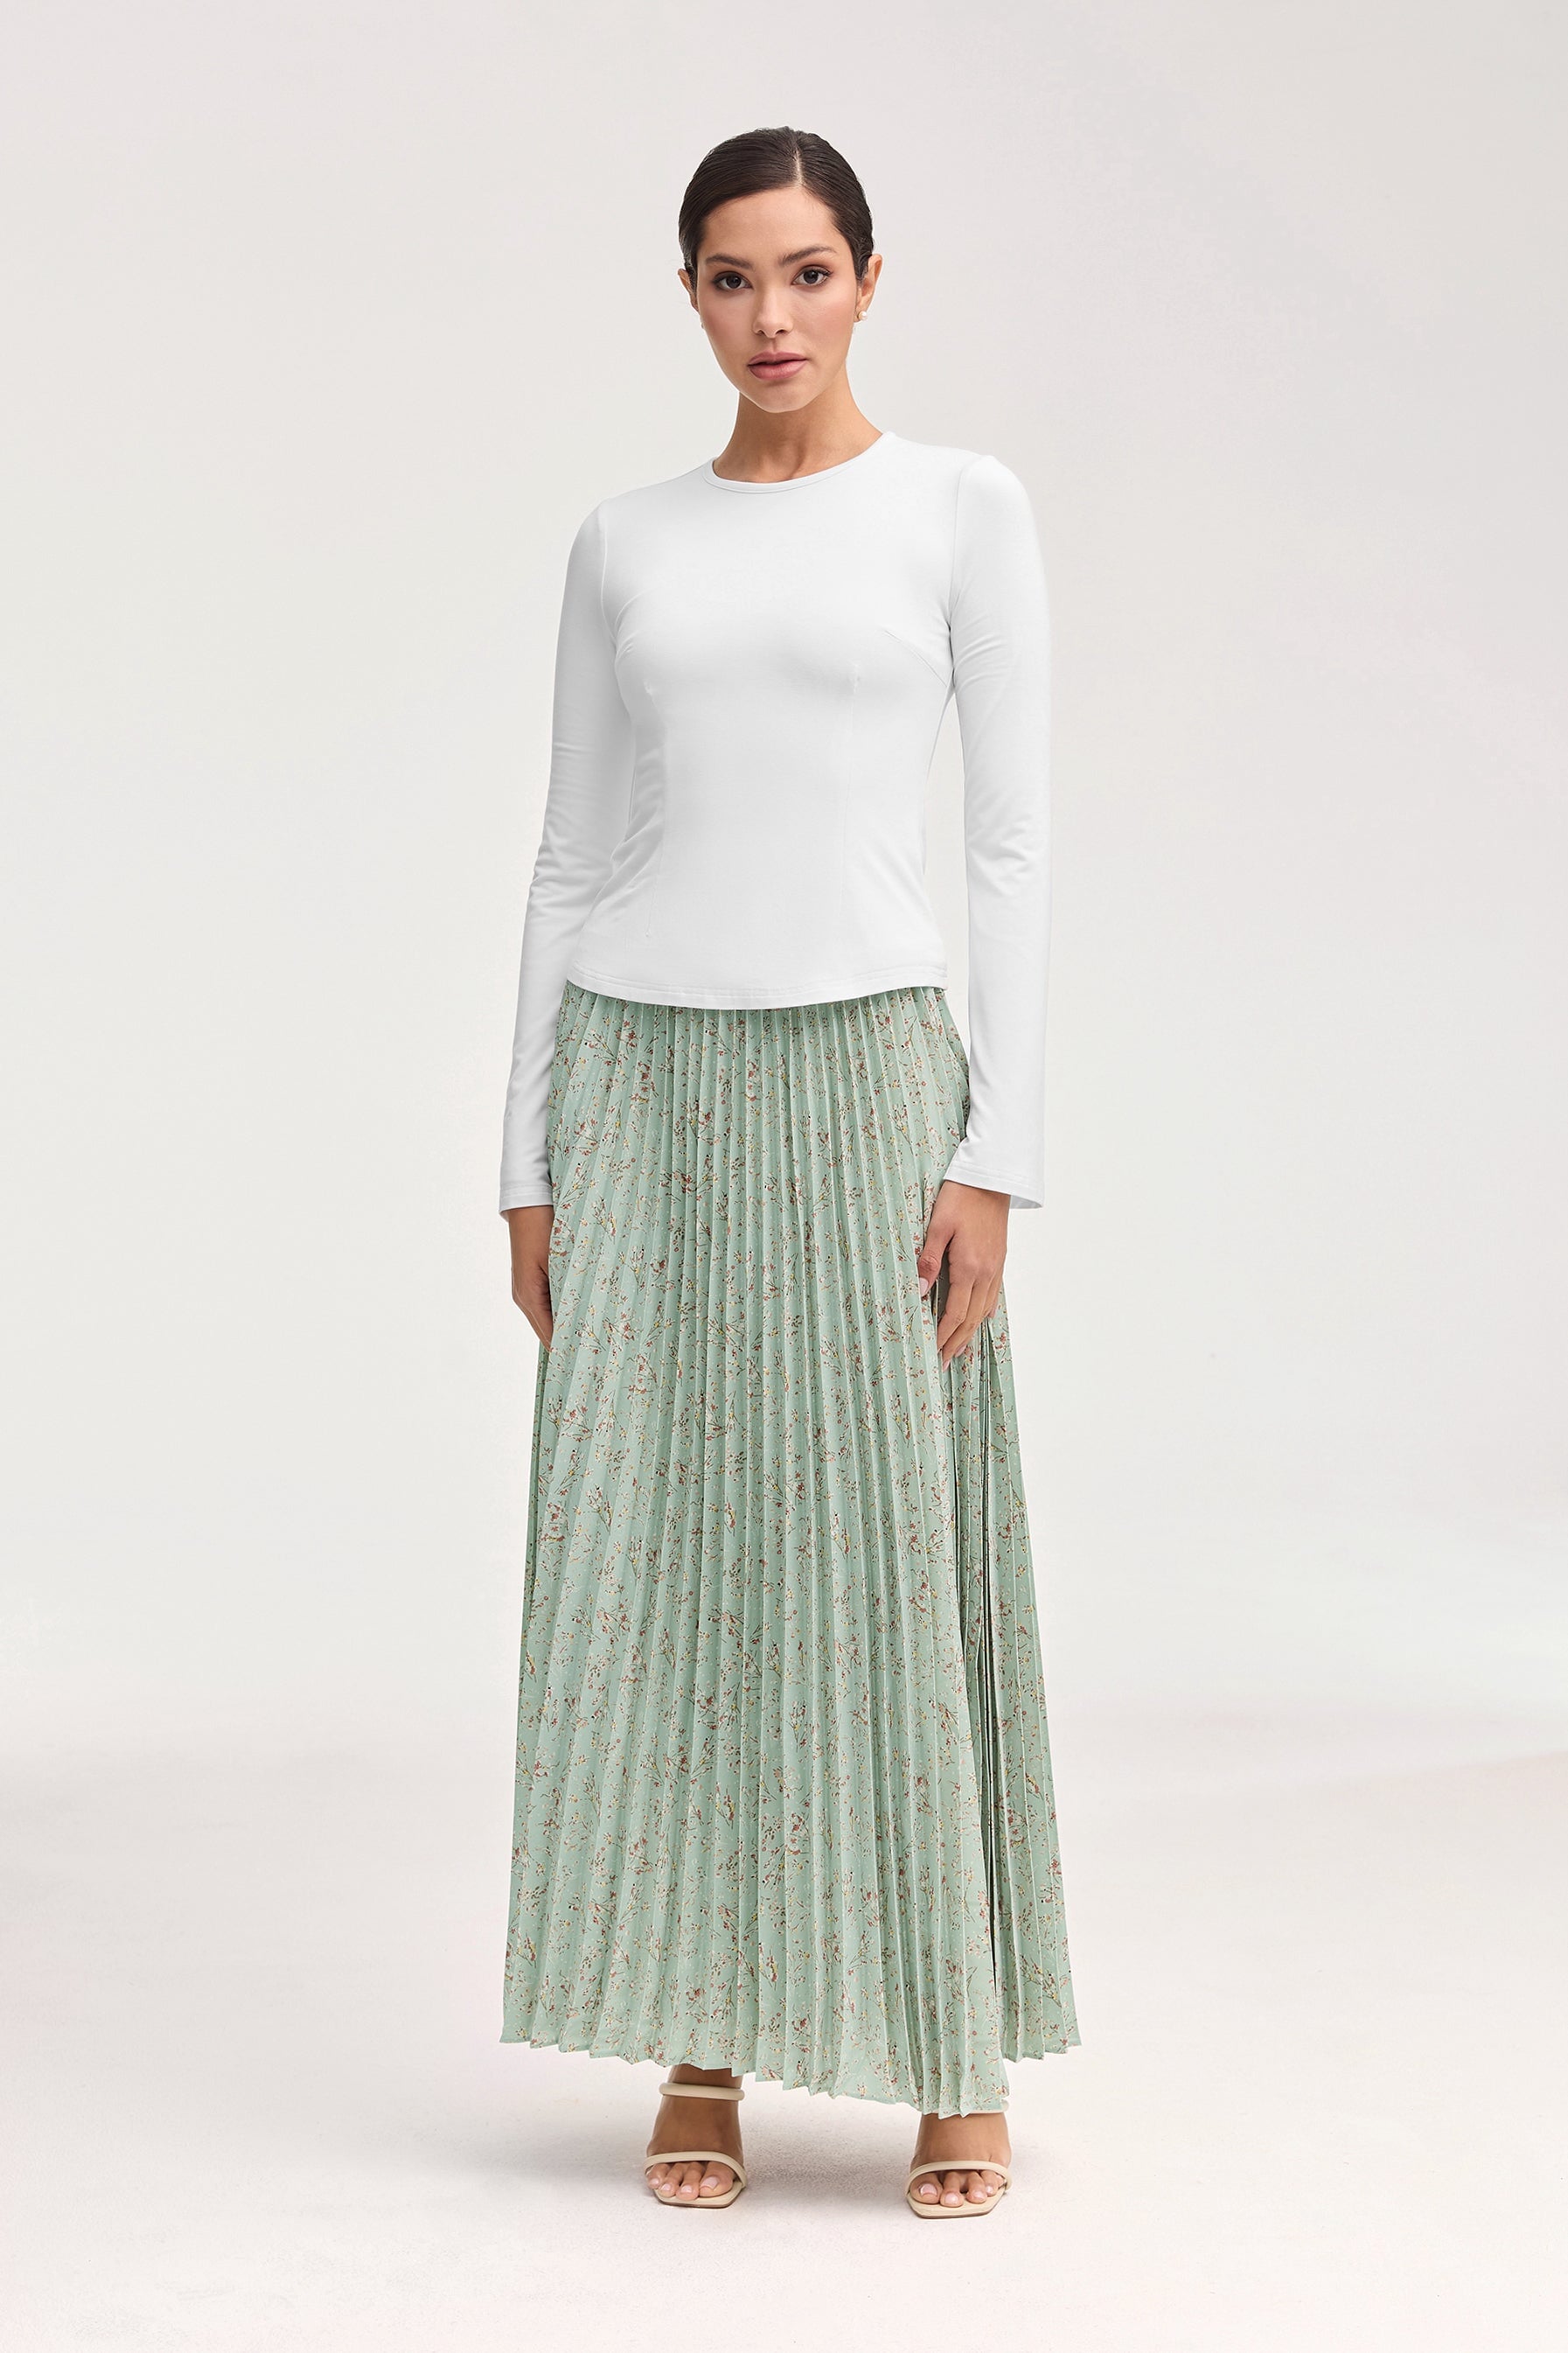 Pleated Floral Maxi Skirt - Sage Clothing epschoolboard 